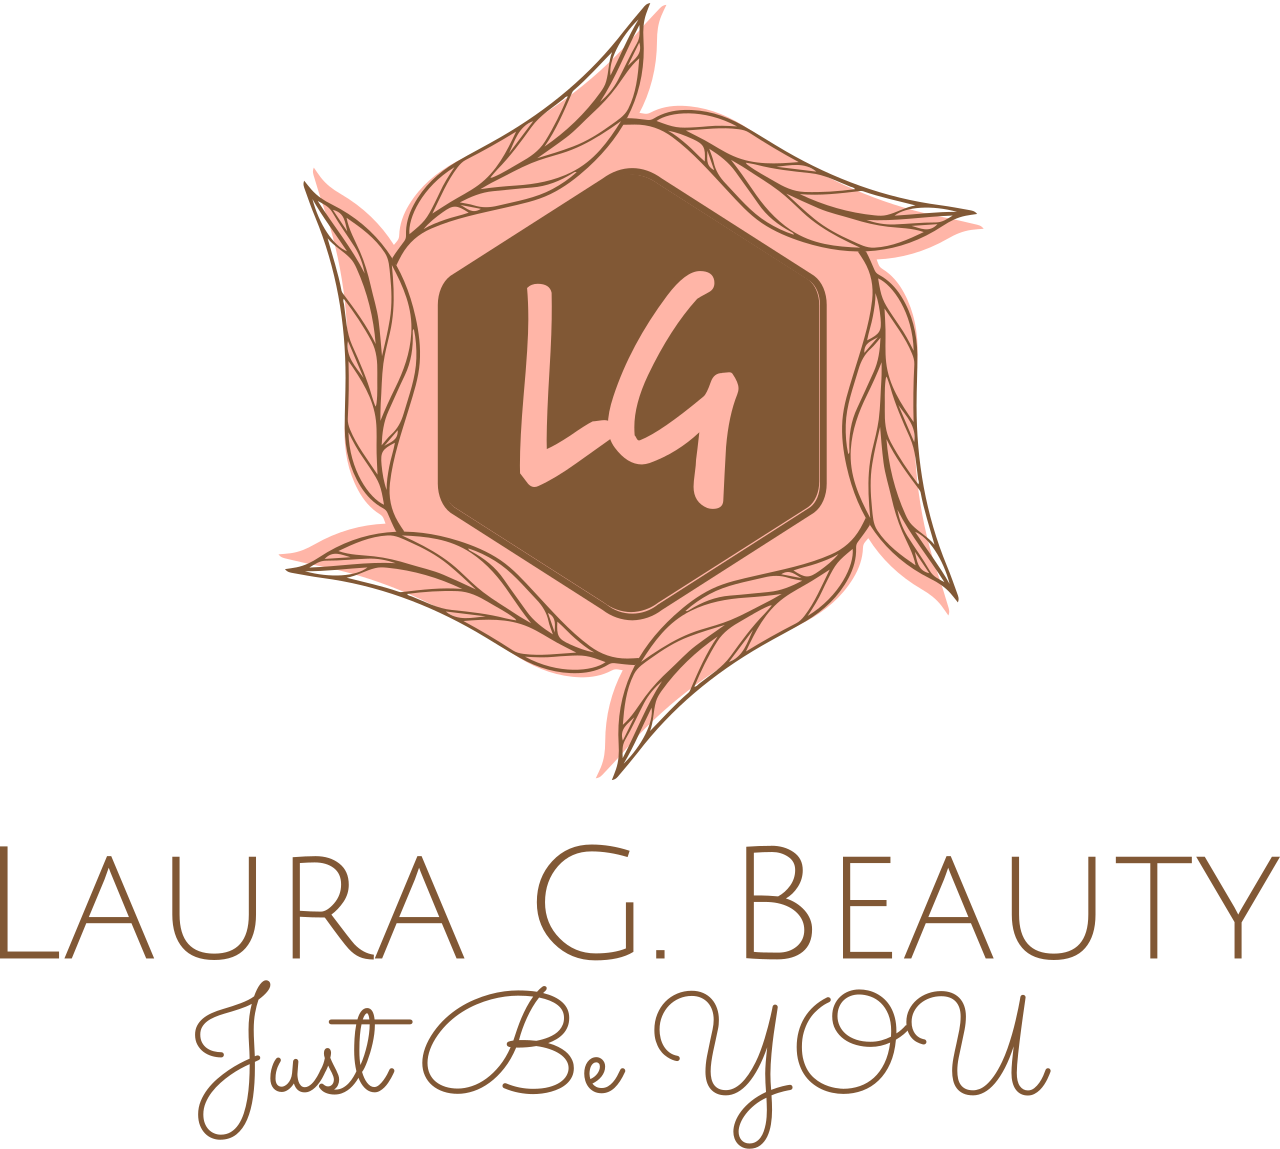 Laura G. Beauty's web page